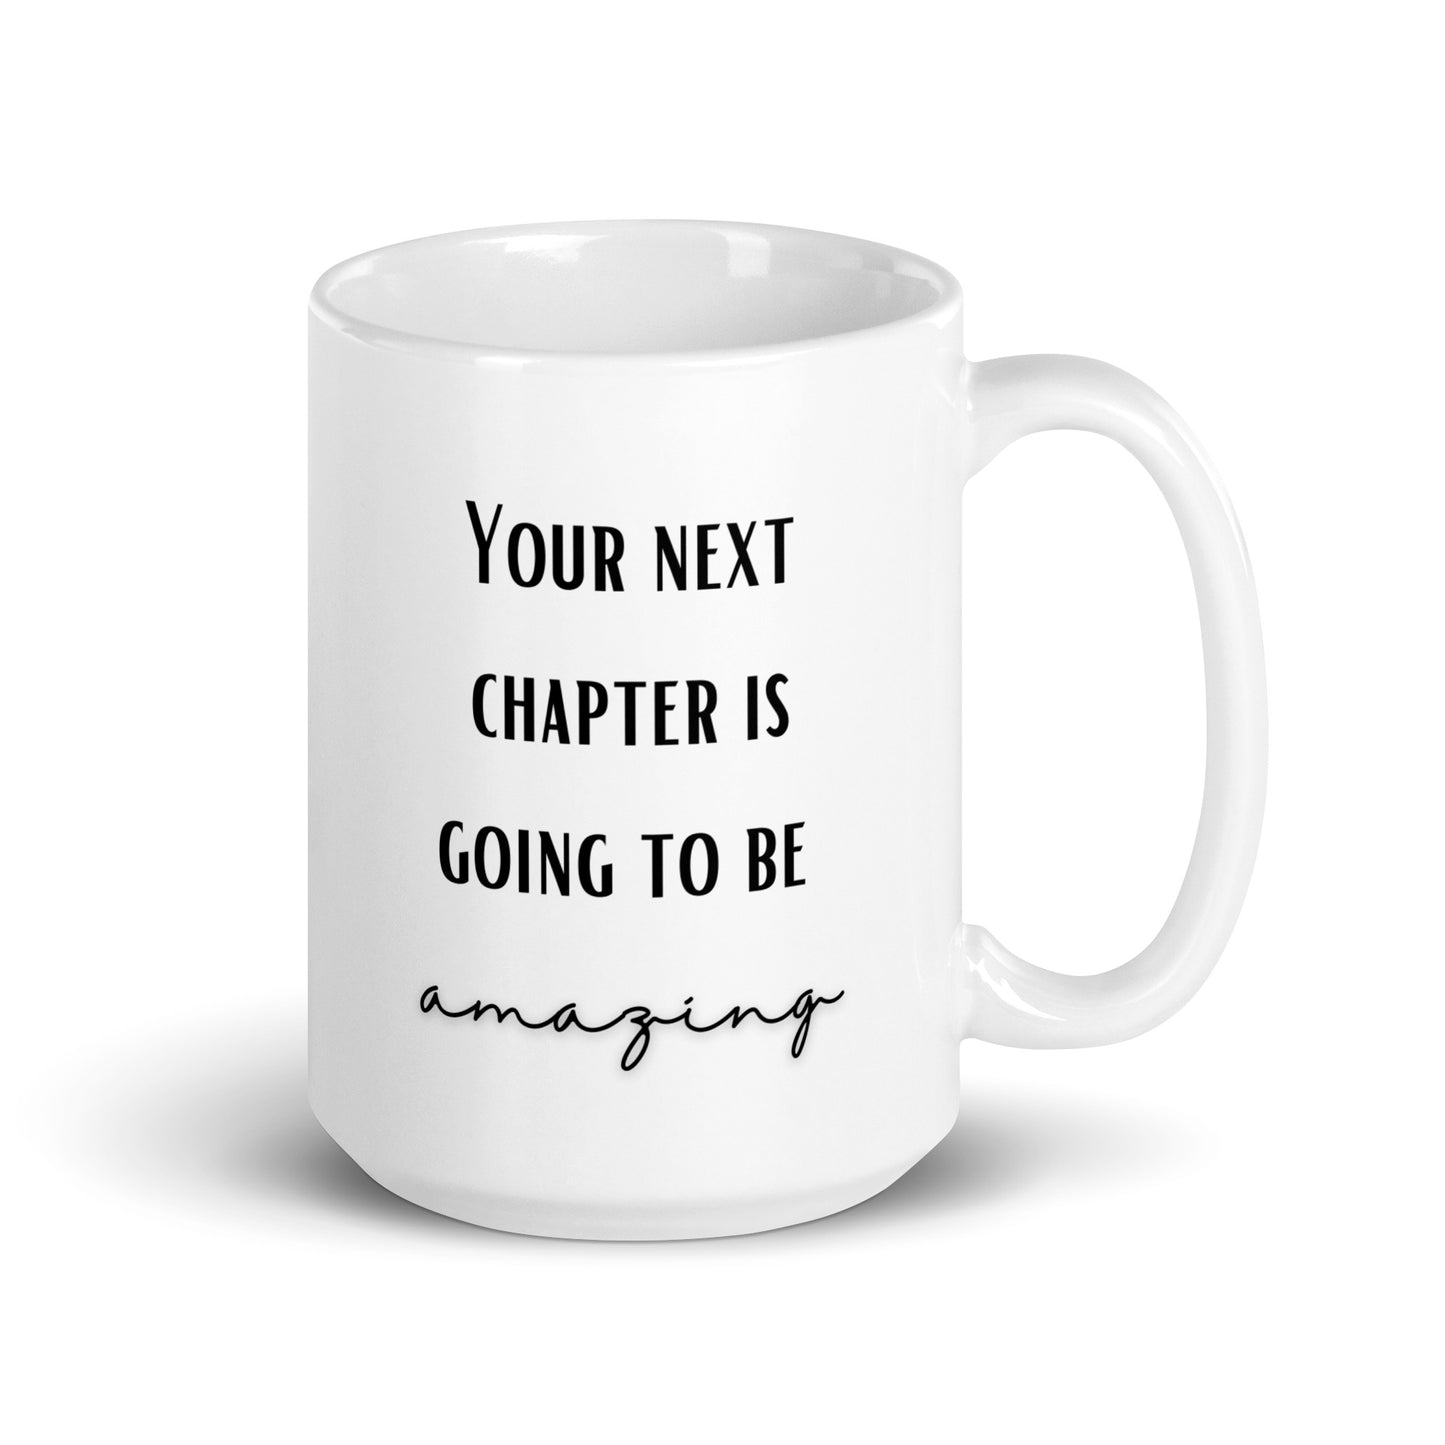 Tasse: Your next chapter is going to be amazing